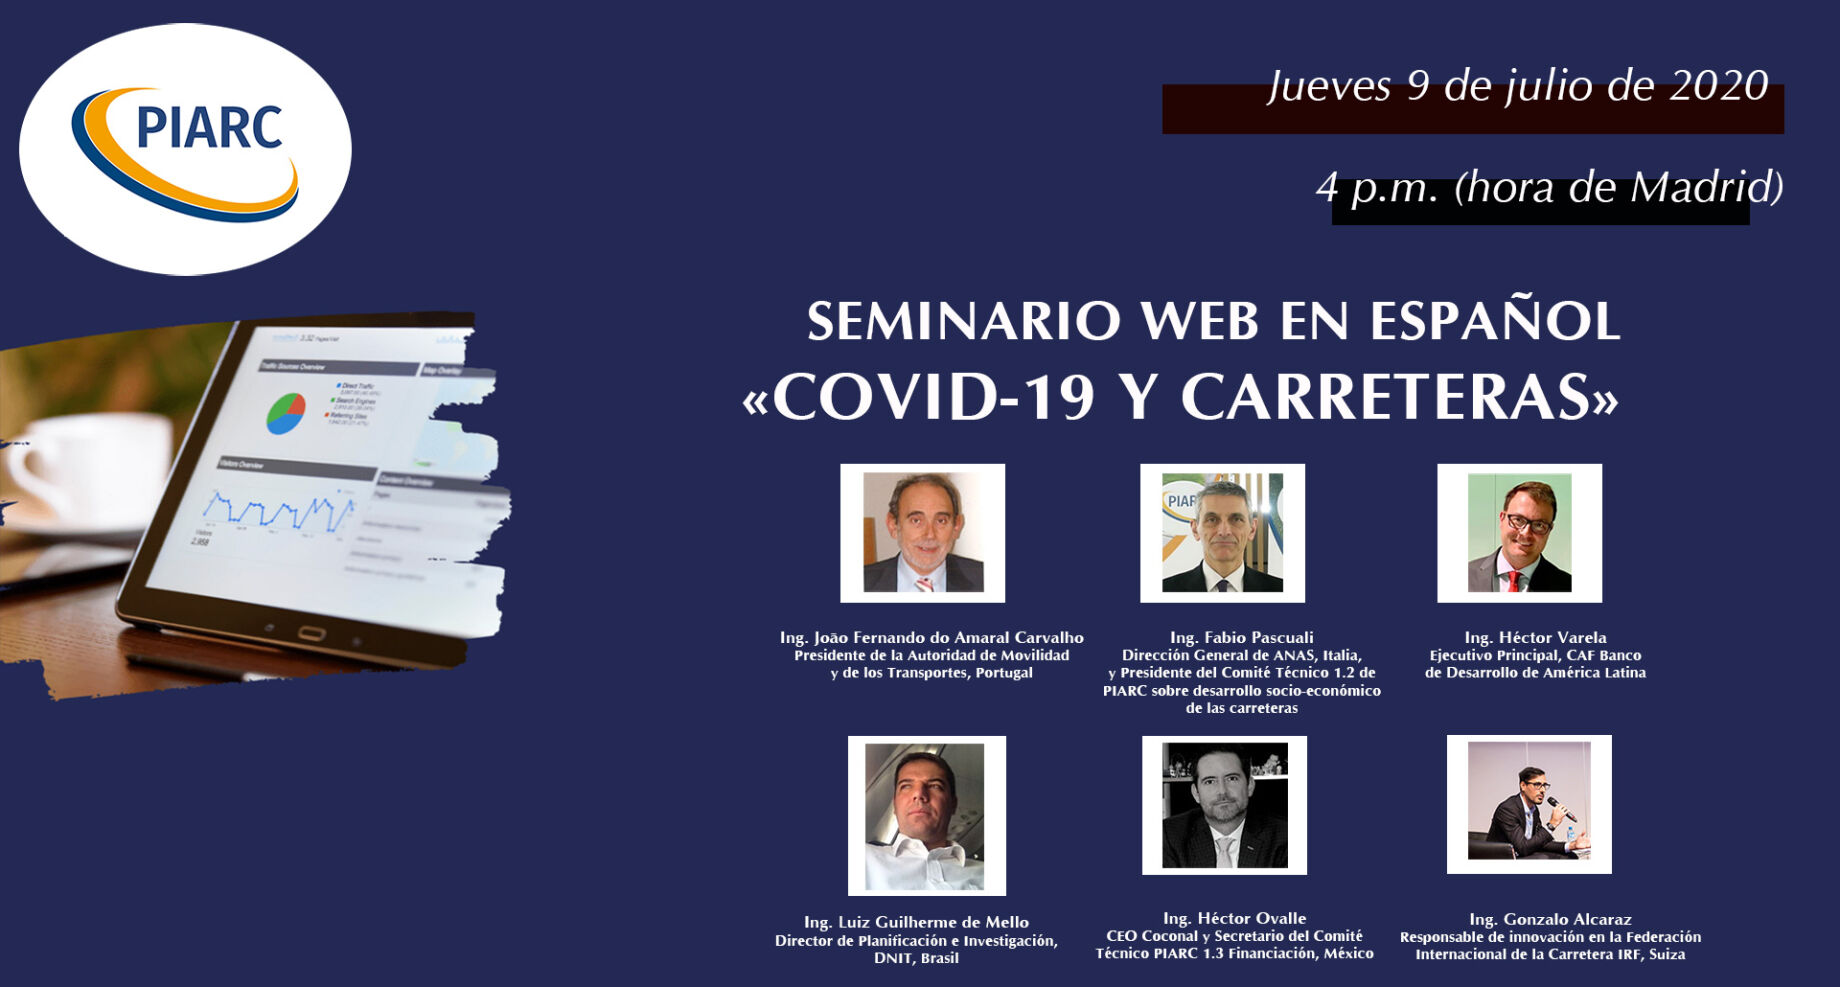 Join the next webinar in Spanish on COVID-19 and roads!